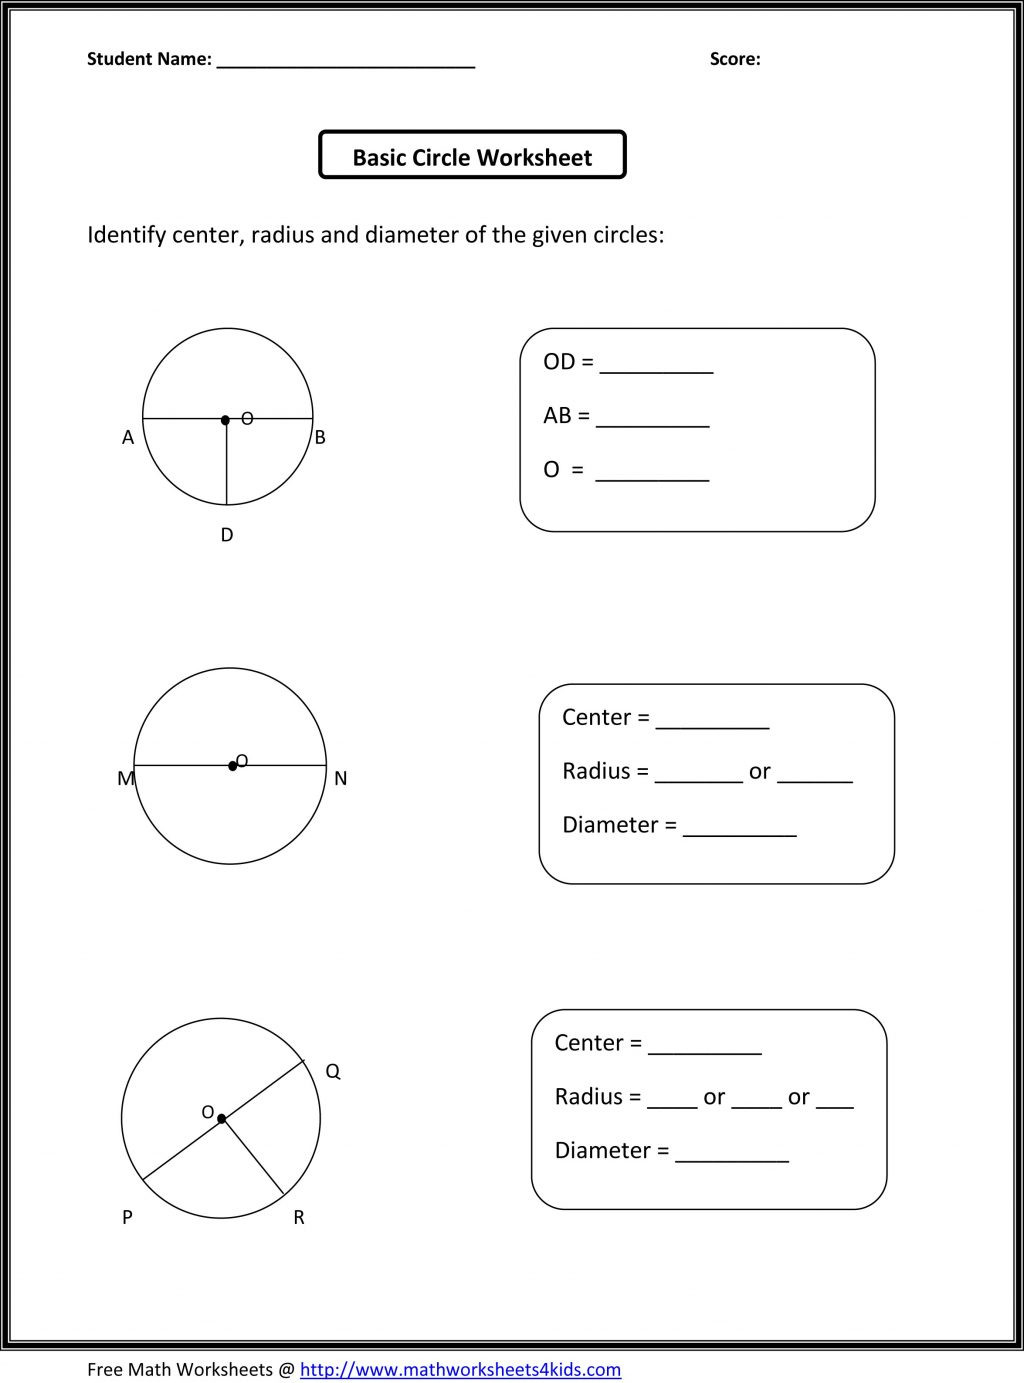 printable-worksheets-for-8th-grade-geometry